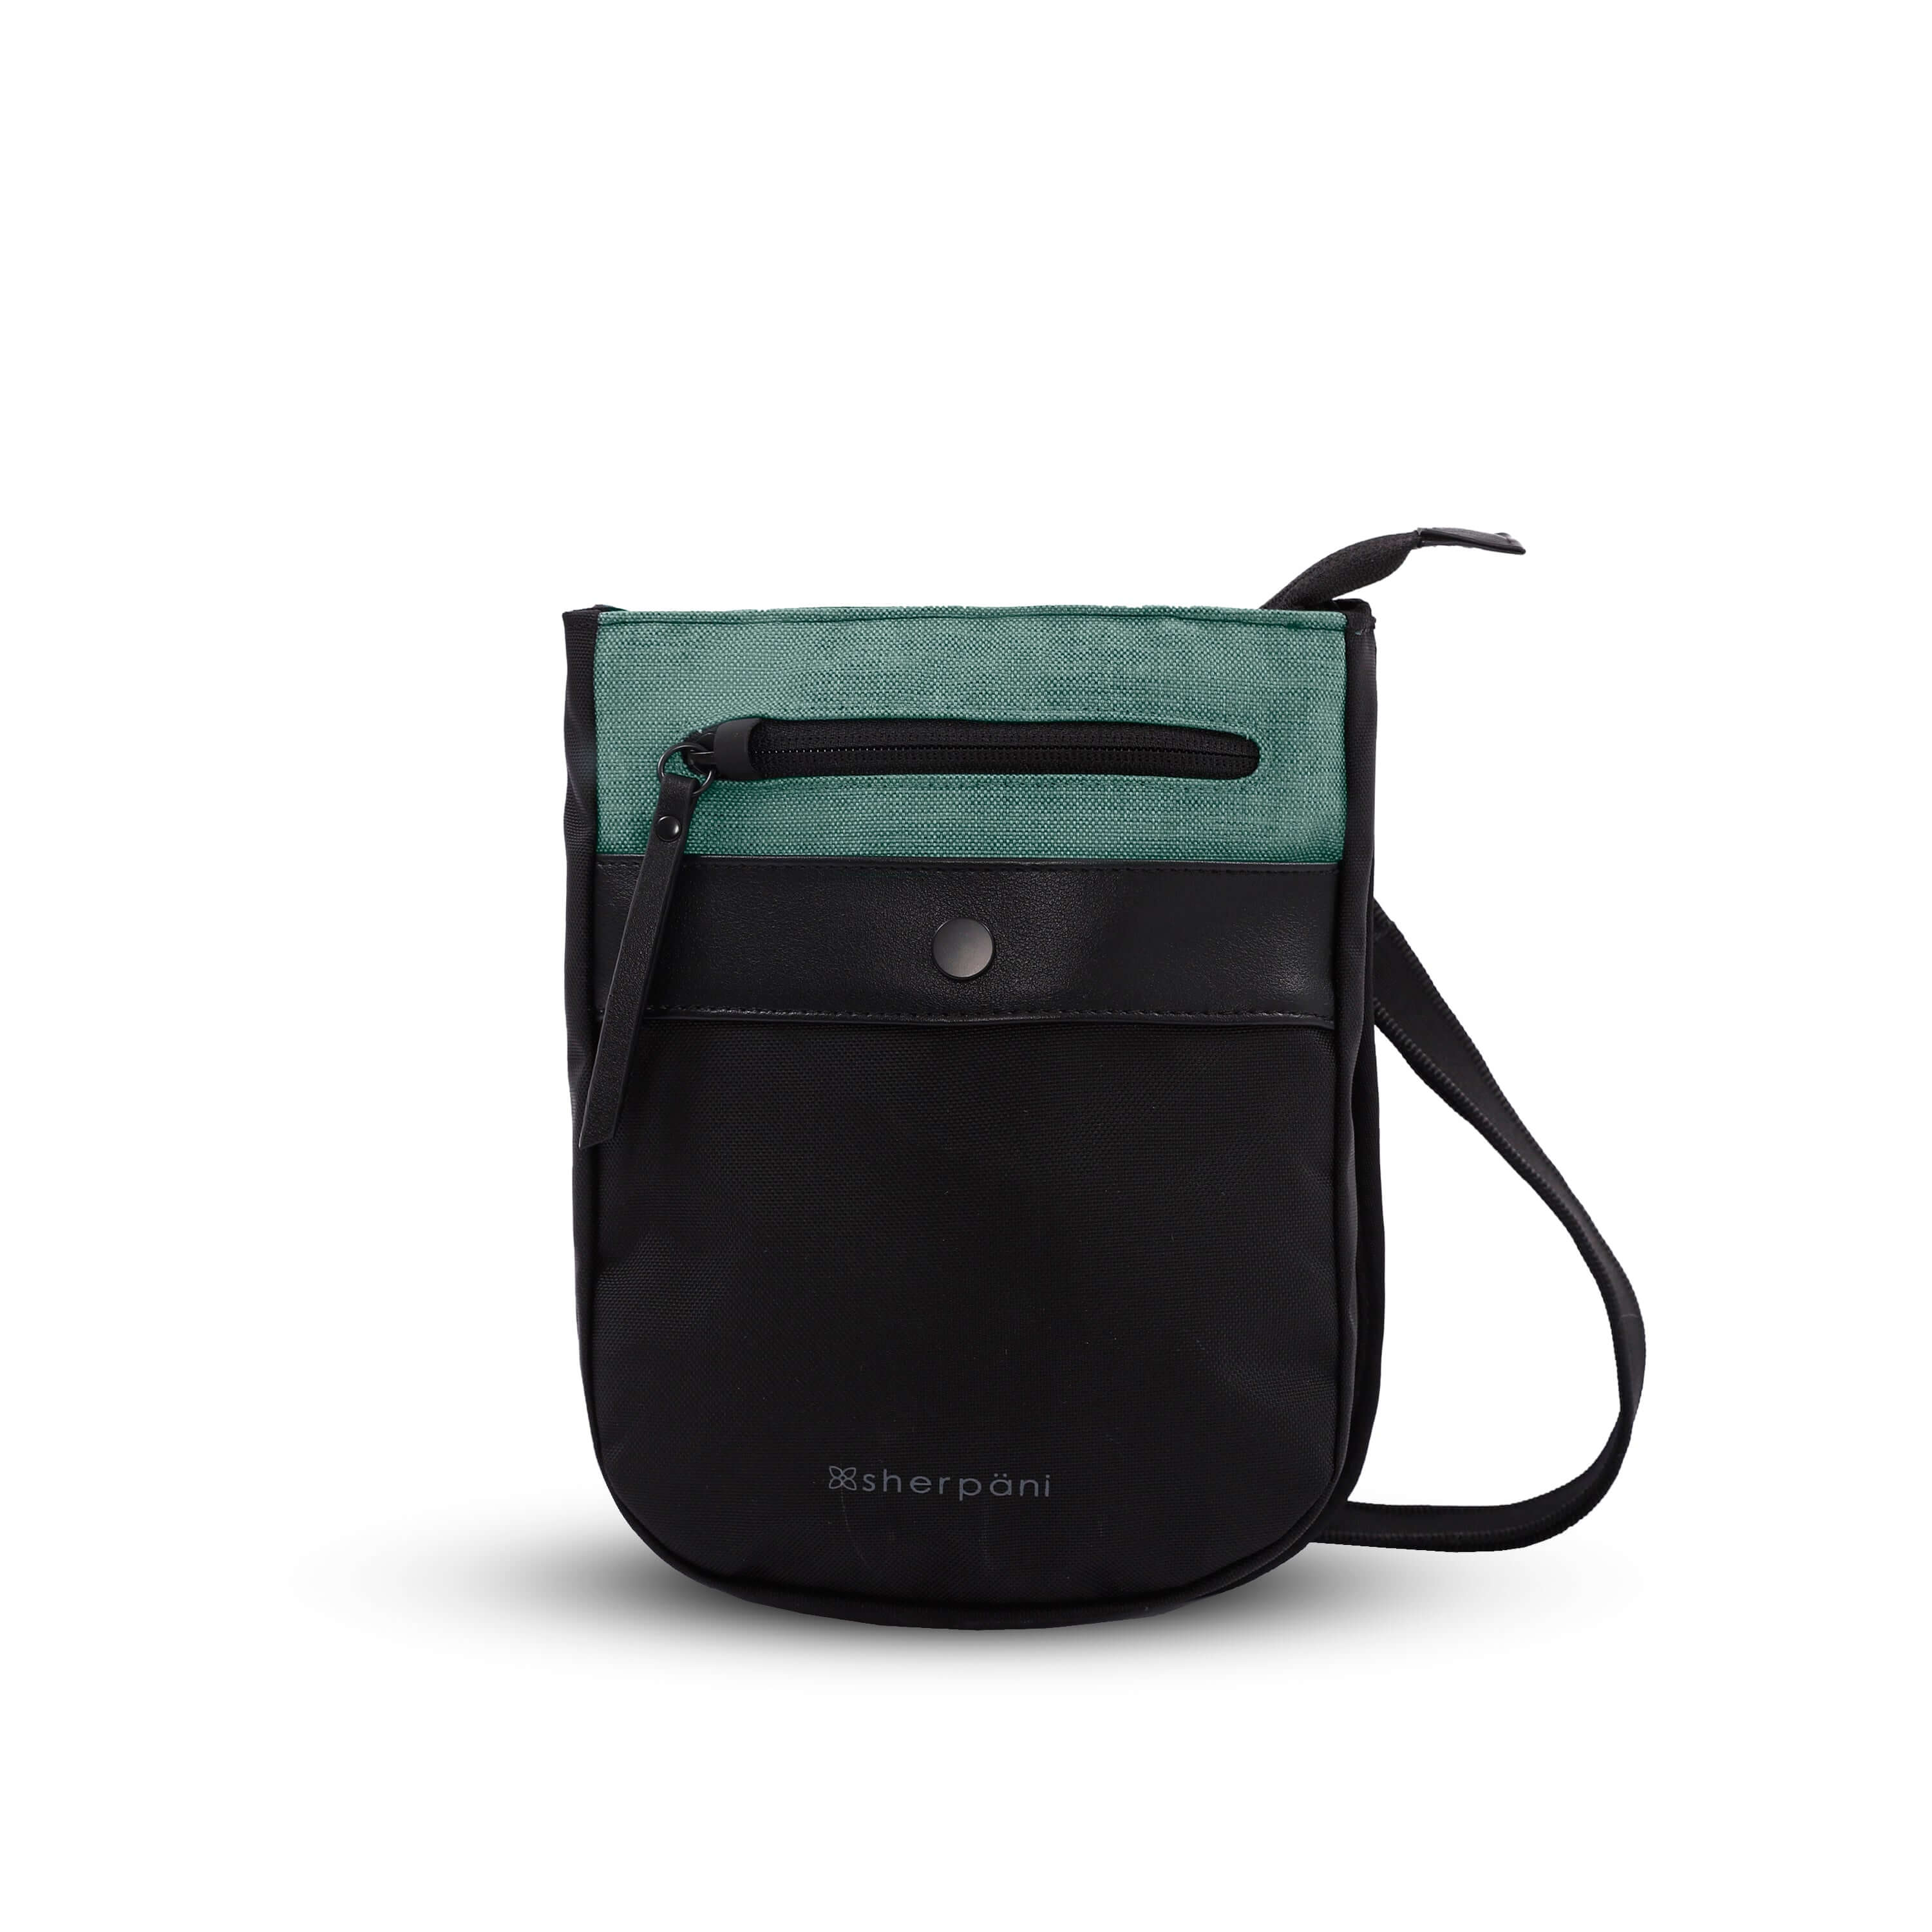 Flat front view of Sherpani’s Anti-Theft bag, the Prima AT in Teal, with vegan leather accents in black. There is an external pouch on the front of the bag that sits below a locking zipper compartment. The bag features an adjustable crossbody strap. 